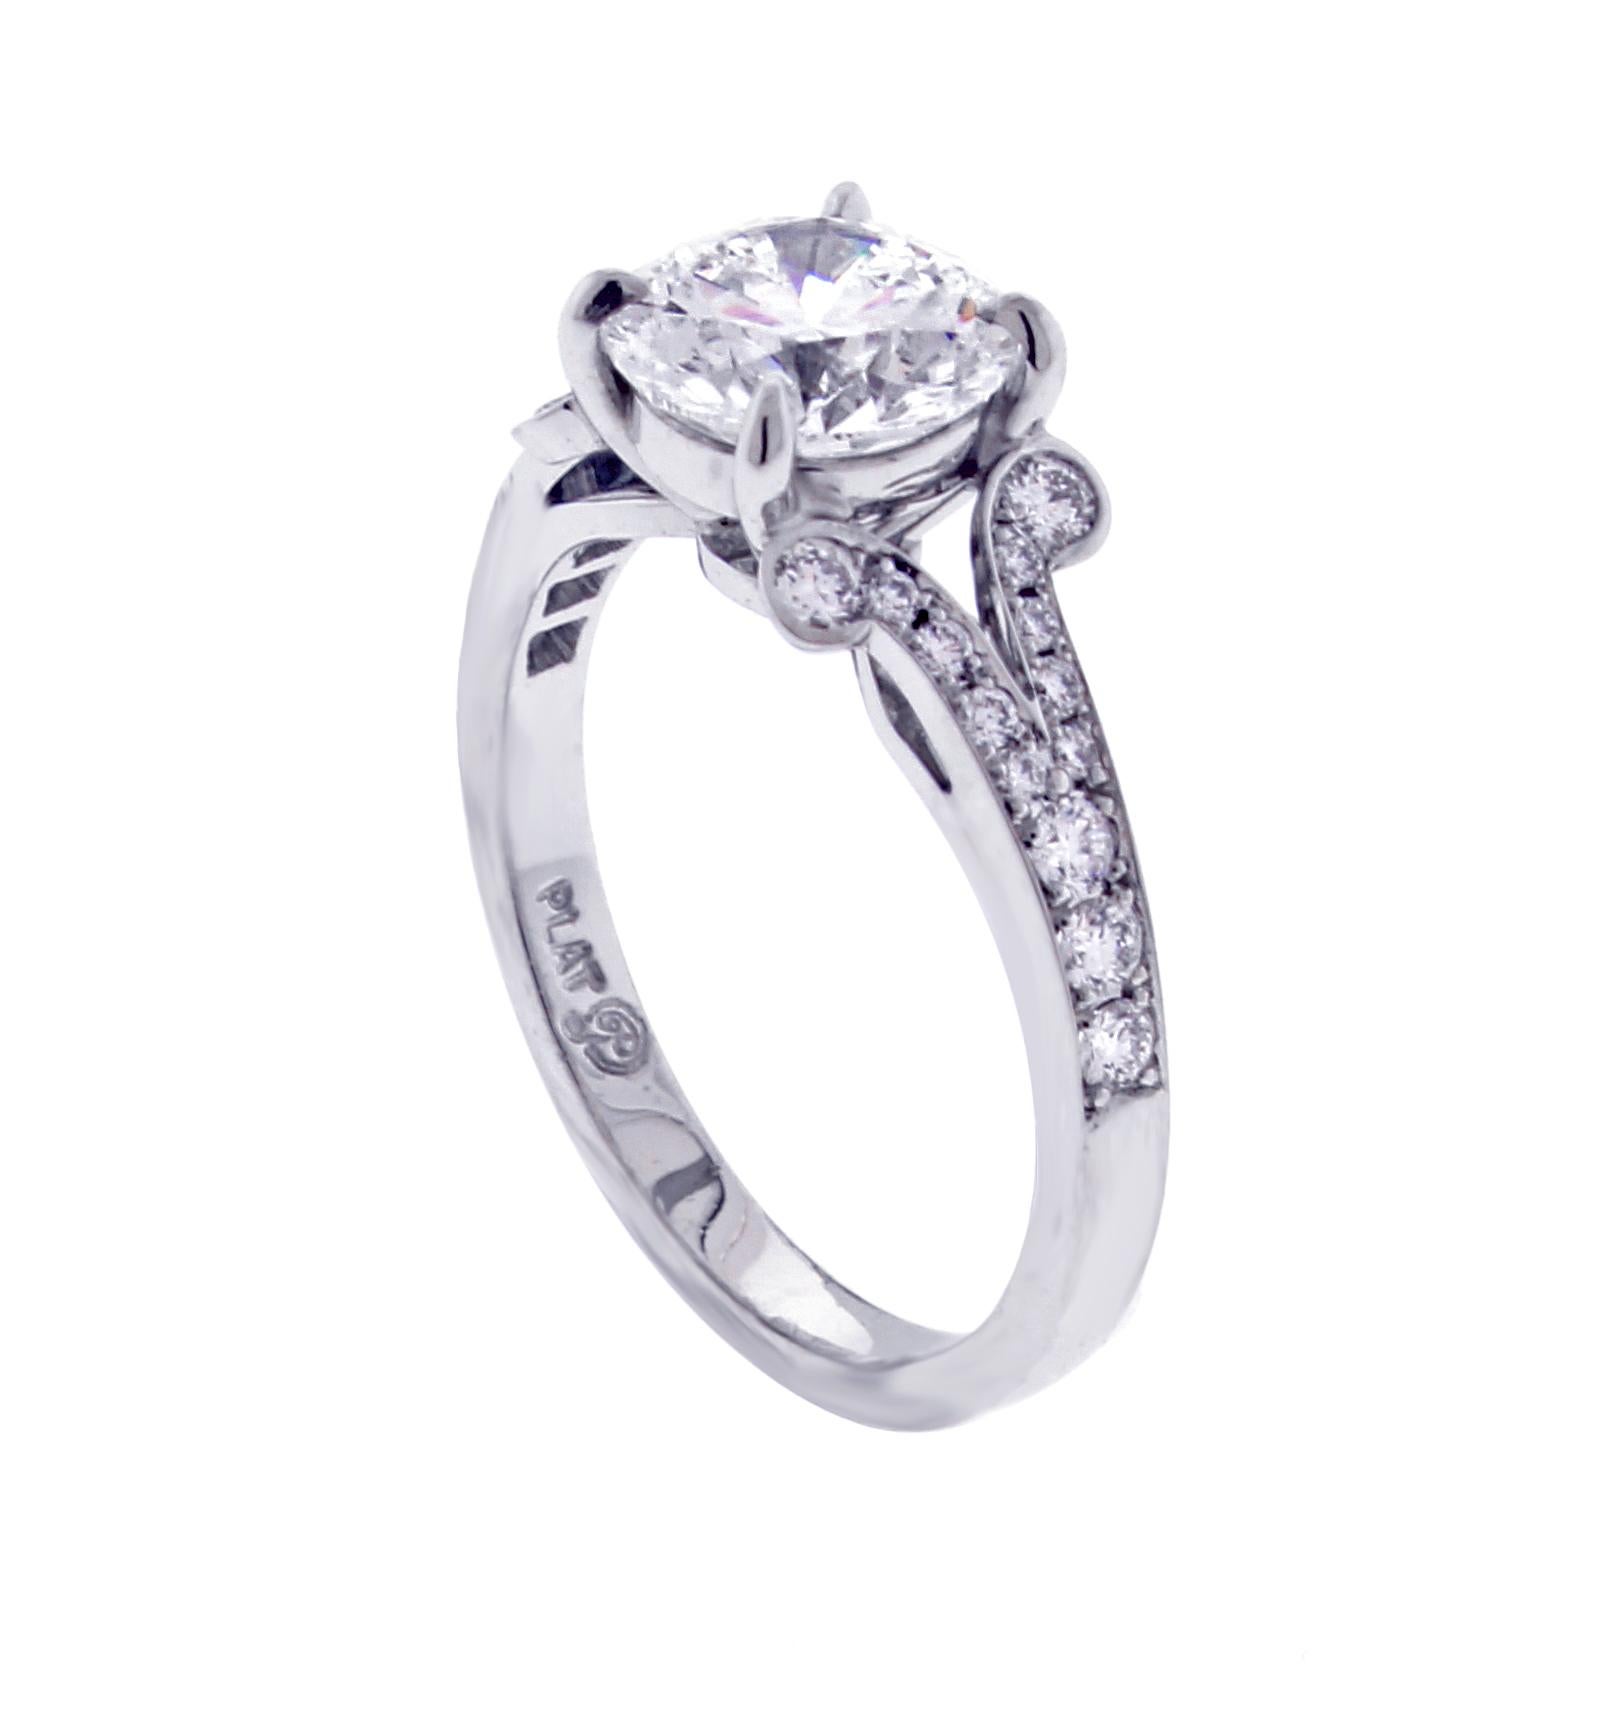  From the master ring makers of Pampillonia jewelers brilliant diamond diamond handmade engagement ring.
♦ Designer: Pampillonia
♦ Metal: Platinum  
♦Diamond=1.51 D Color SI1 clarity, Triple excellent cut G.I.A
♦ 26 Diamonds=.65 carats
♦ Circa